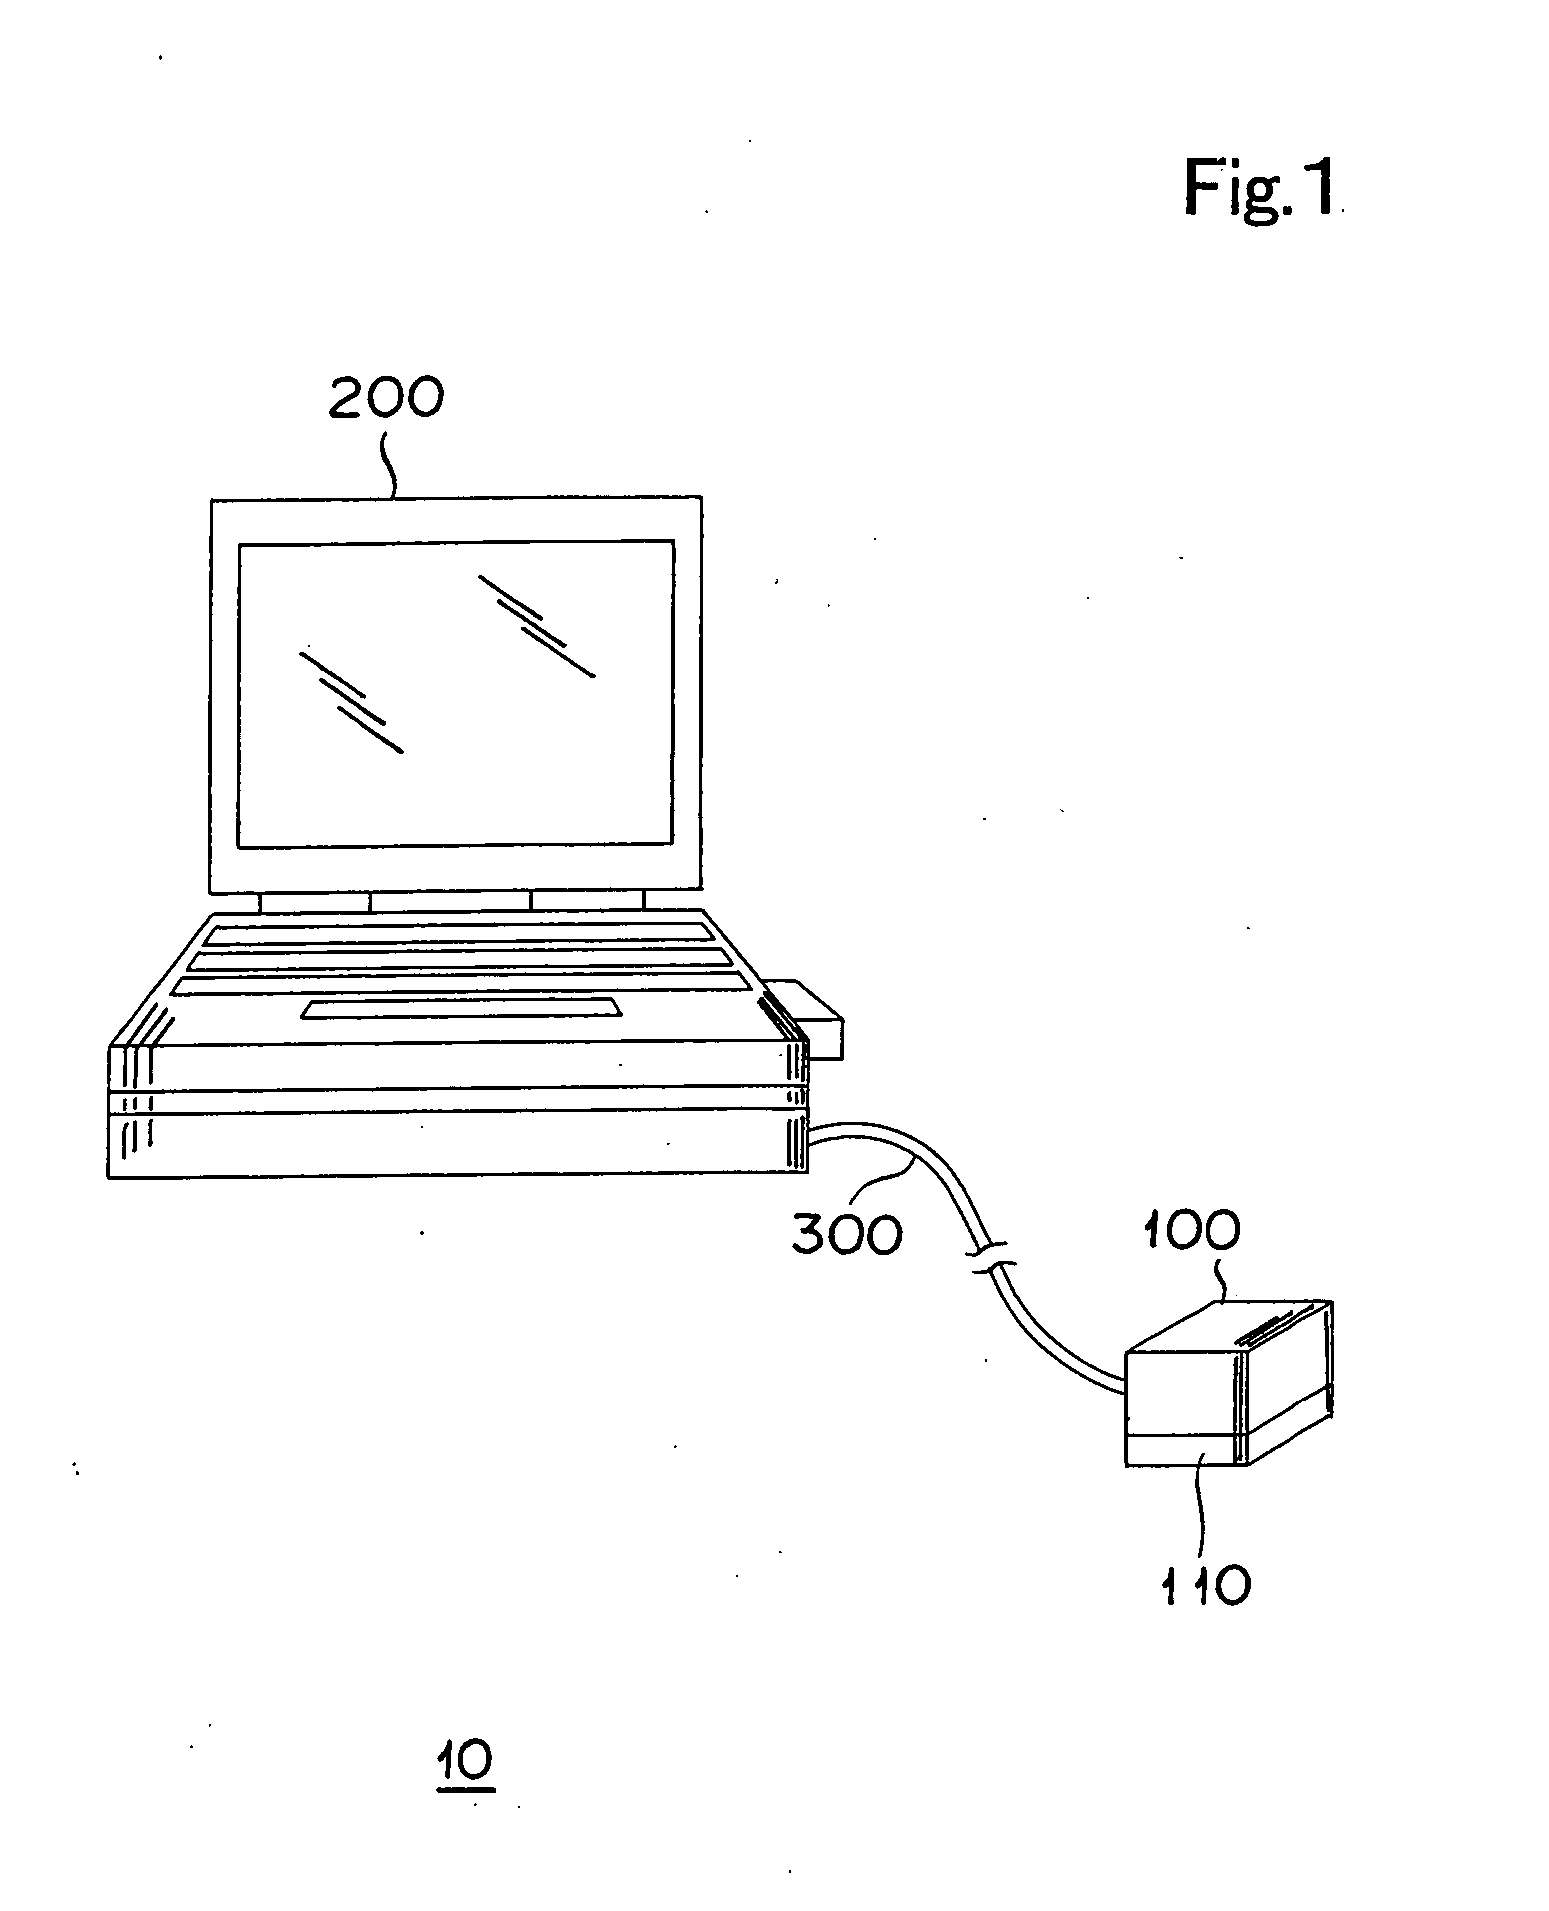 Testing device for evaluating performance of closure of a vehicle door and testing method